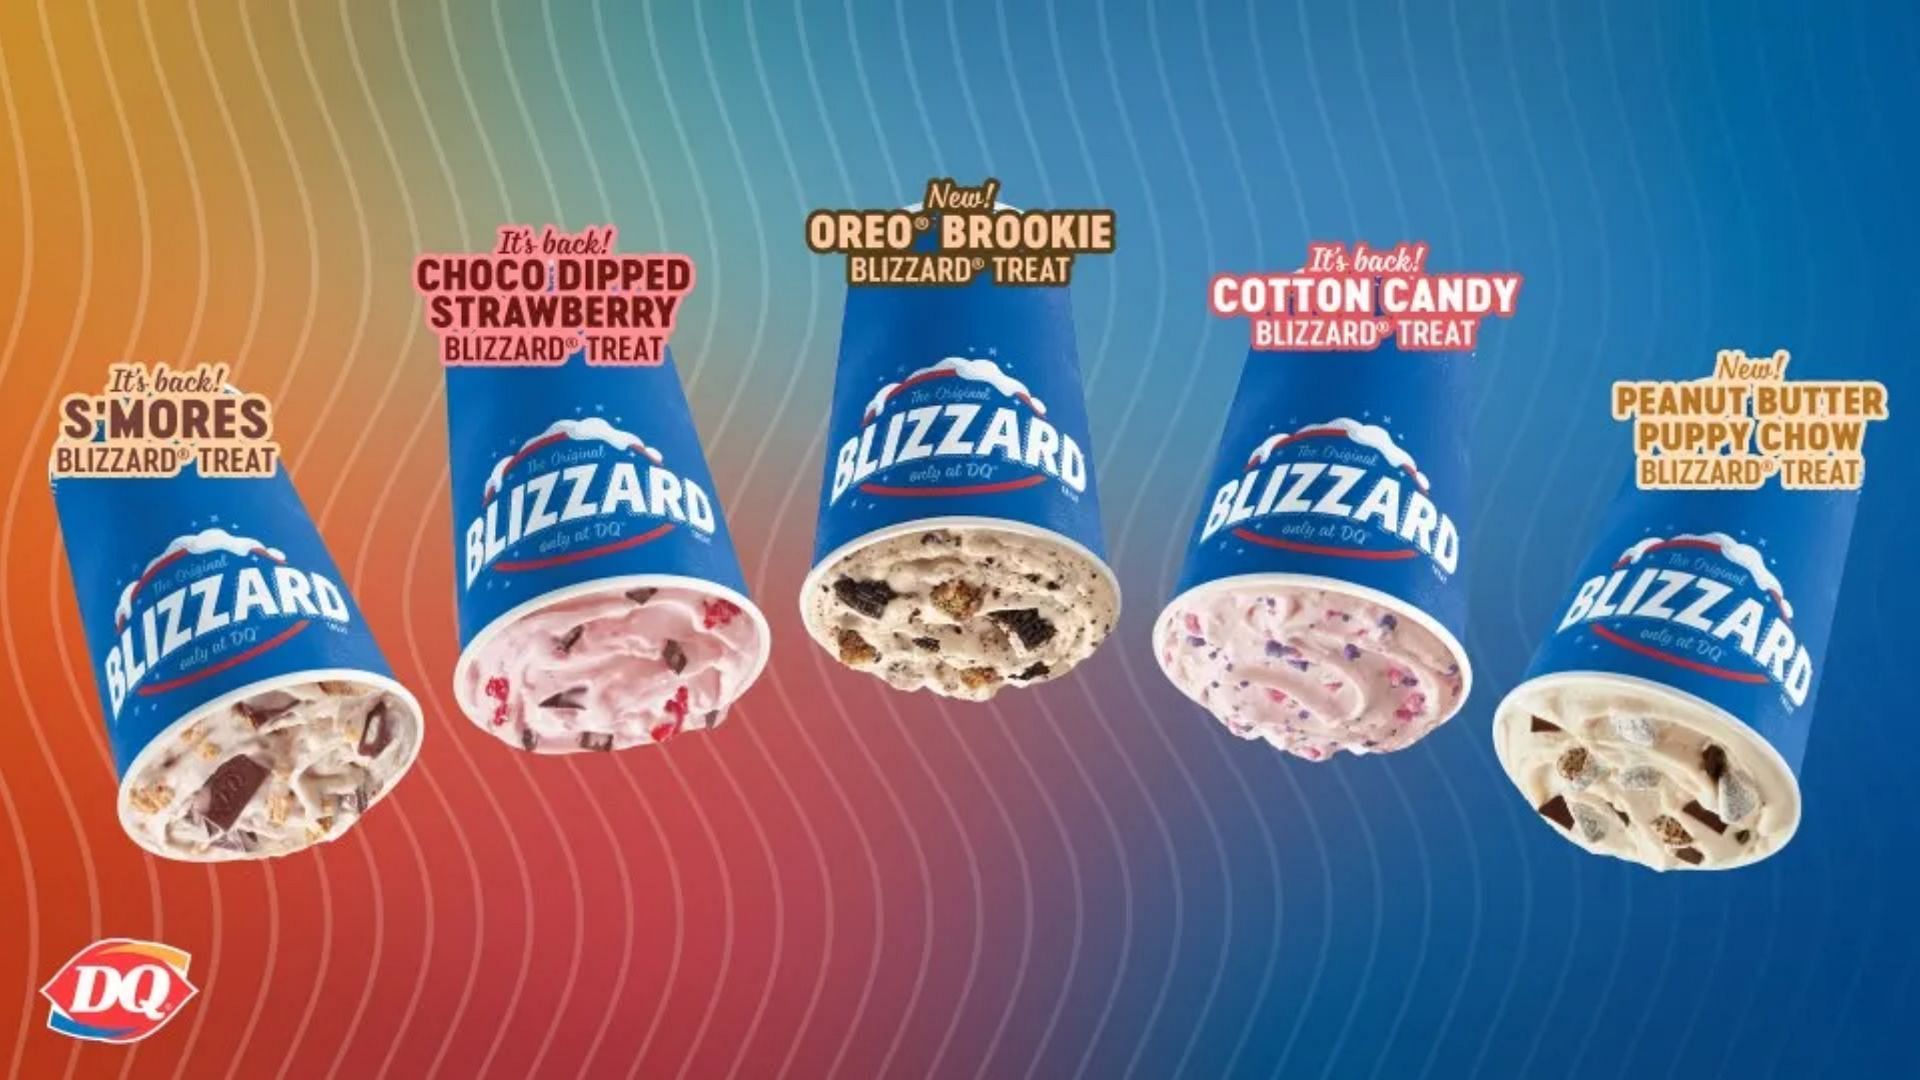 fans will be able to enjoy a wide range of returning and new Blizzard Treat flavors during the celebratory event starting April 10 (Image via Dairy Queen)